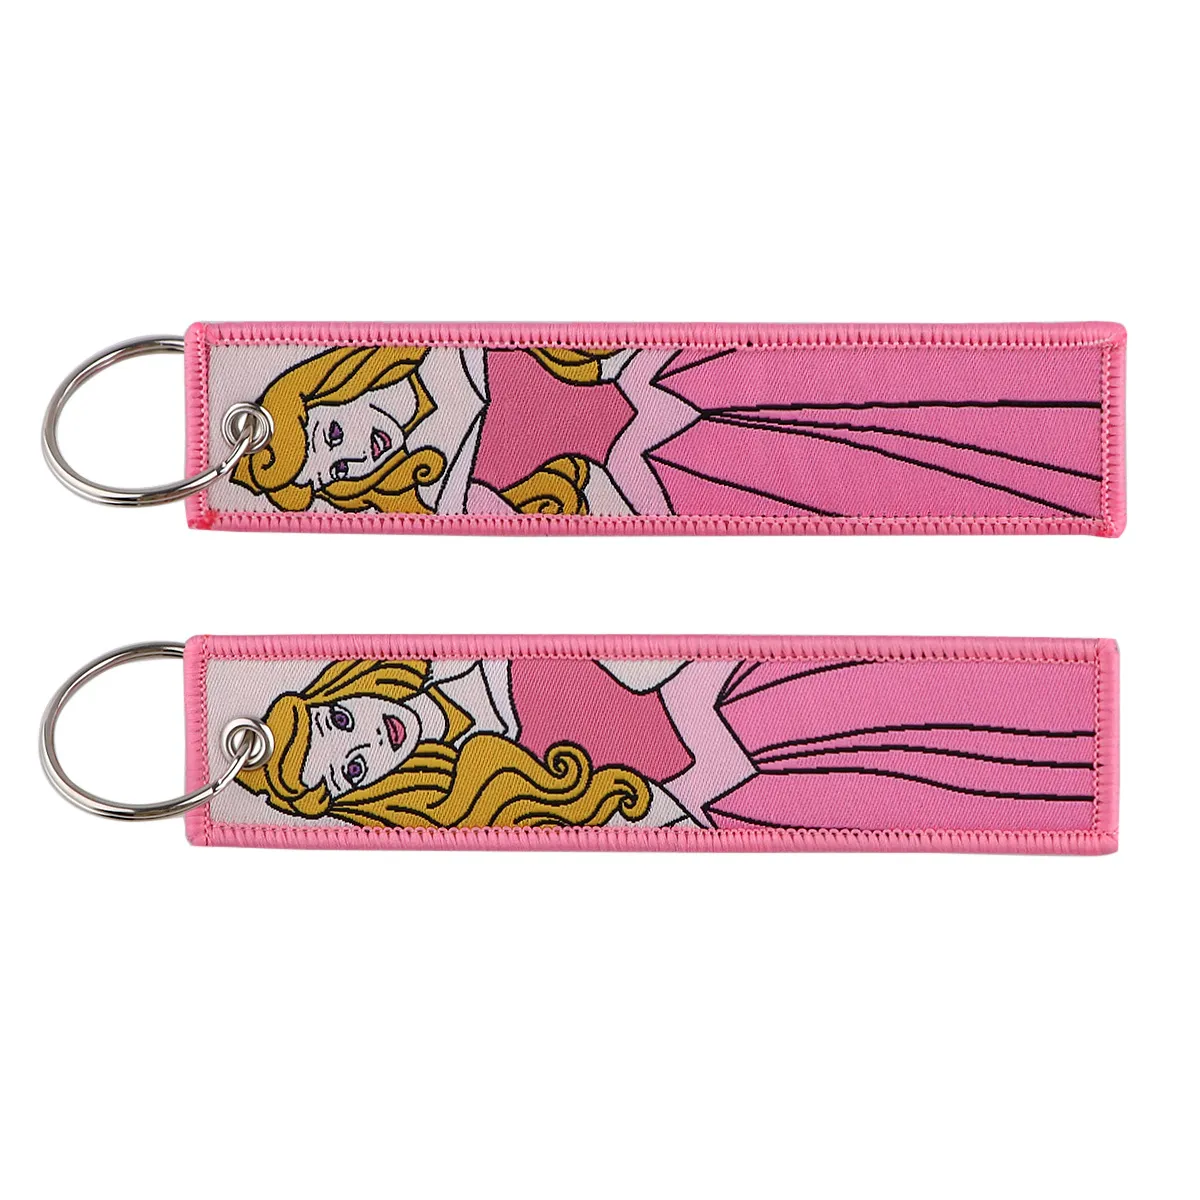 Keychains & Lanyards Various Types Of Cartoon Cool Key Tag Embroidery Fobs For Motorcycles Cars Bag Backpack Keychain Fashion Ring Gi Otitd